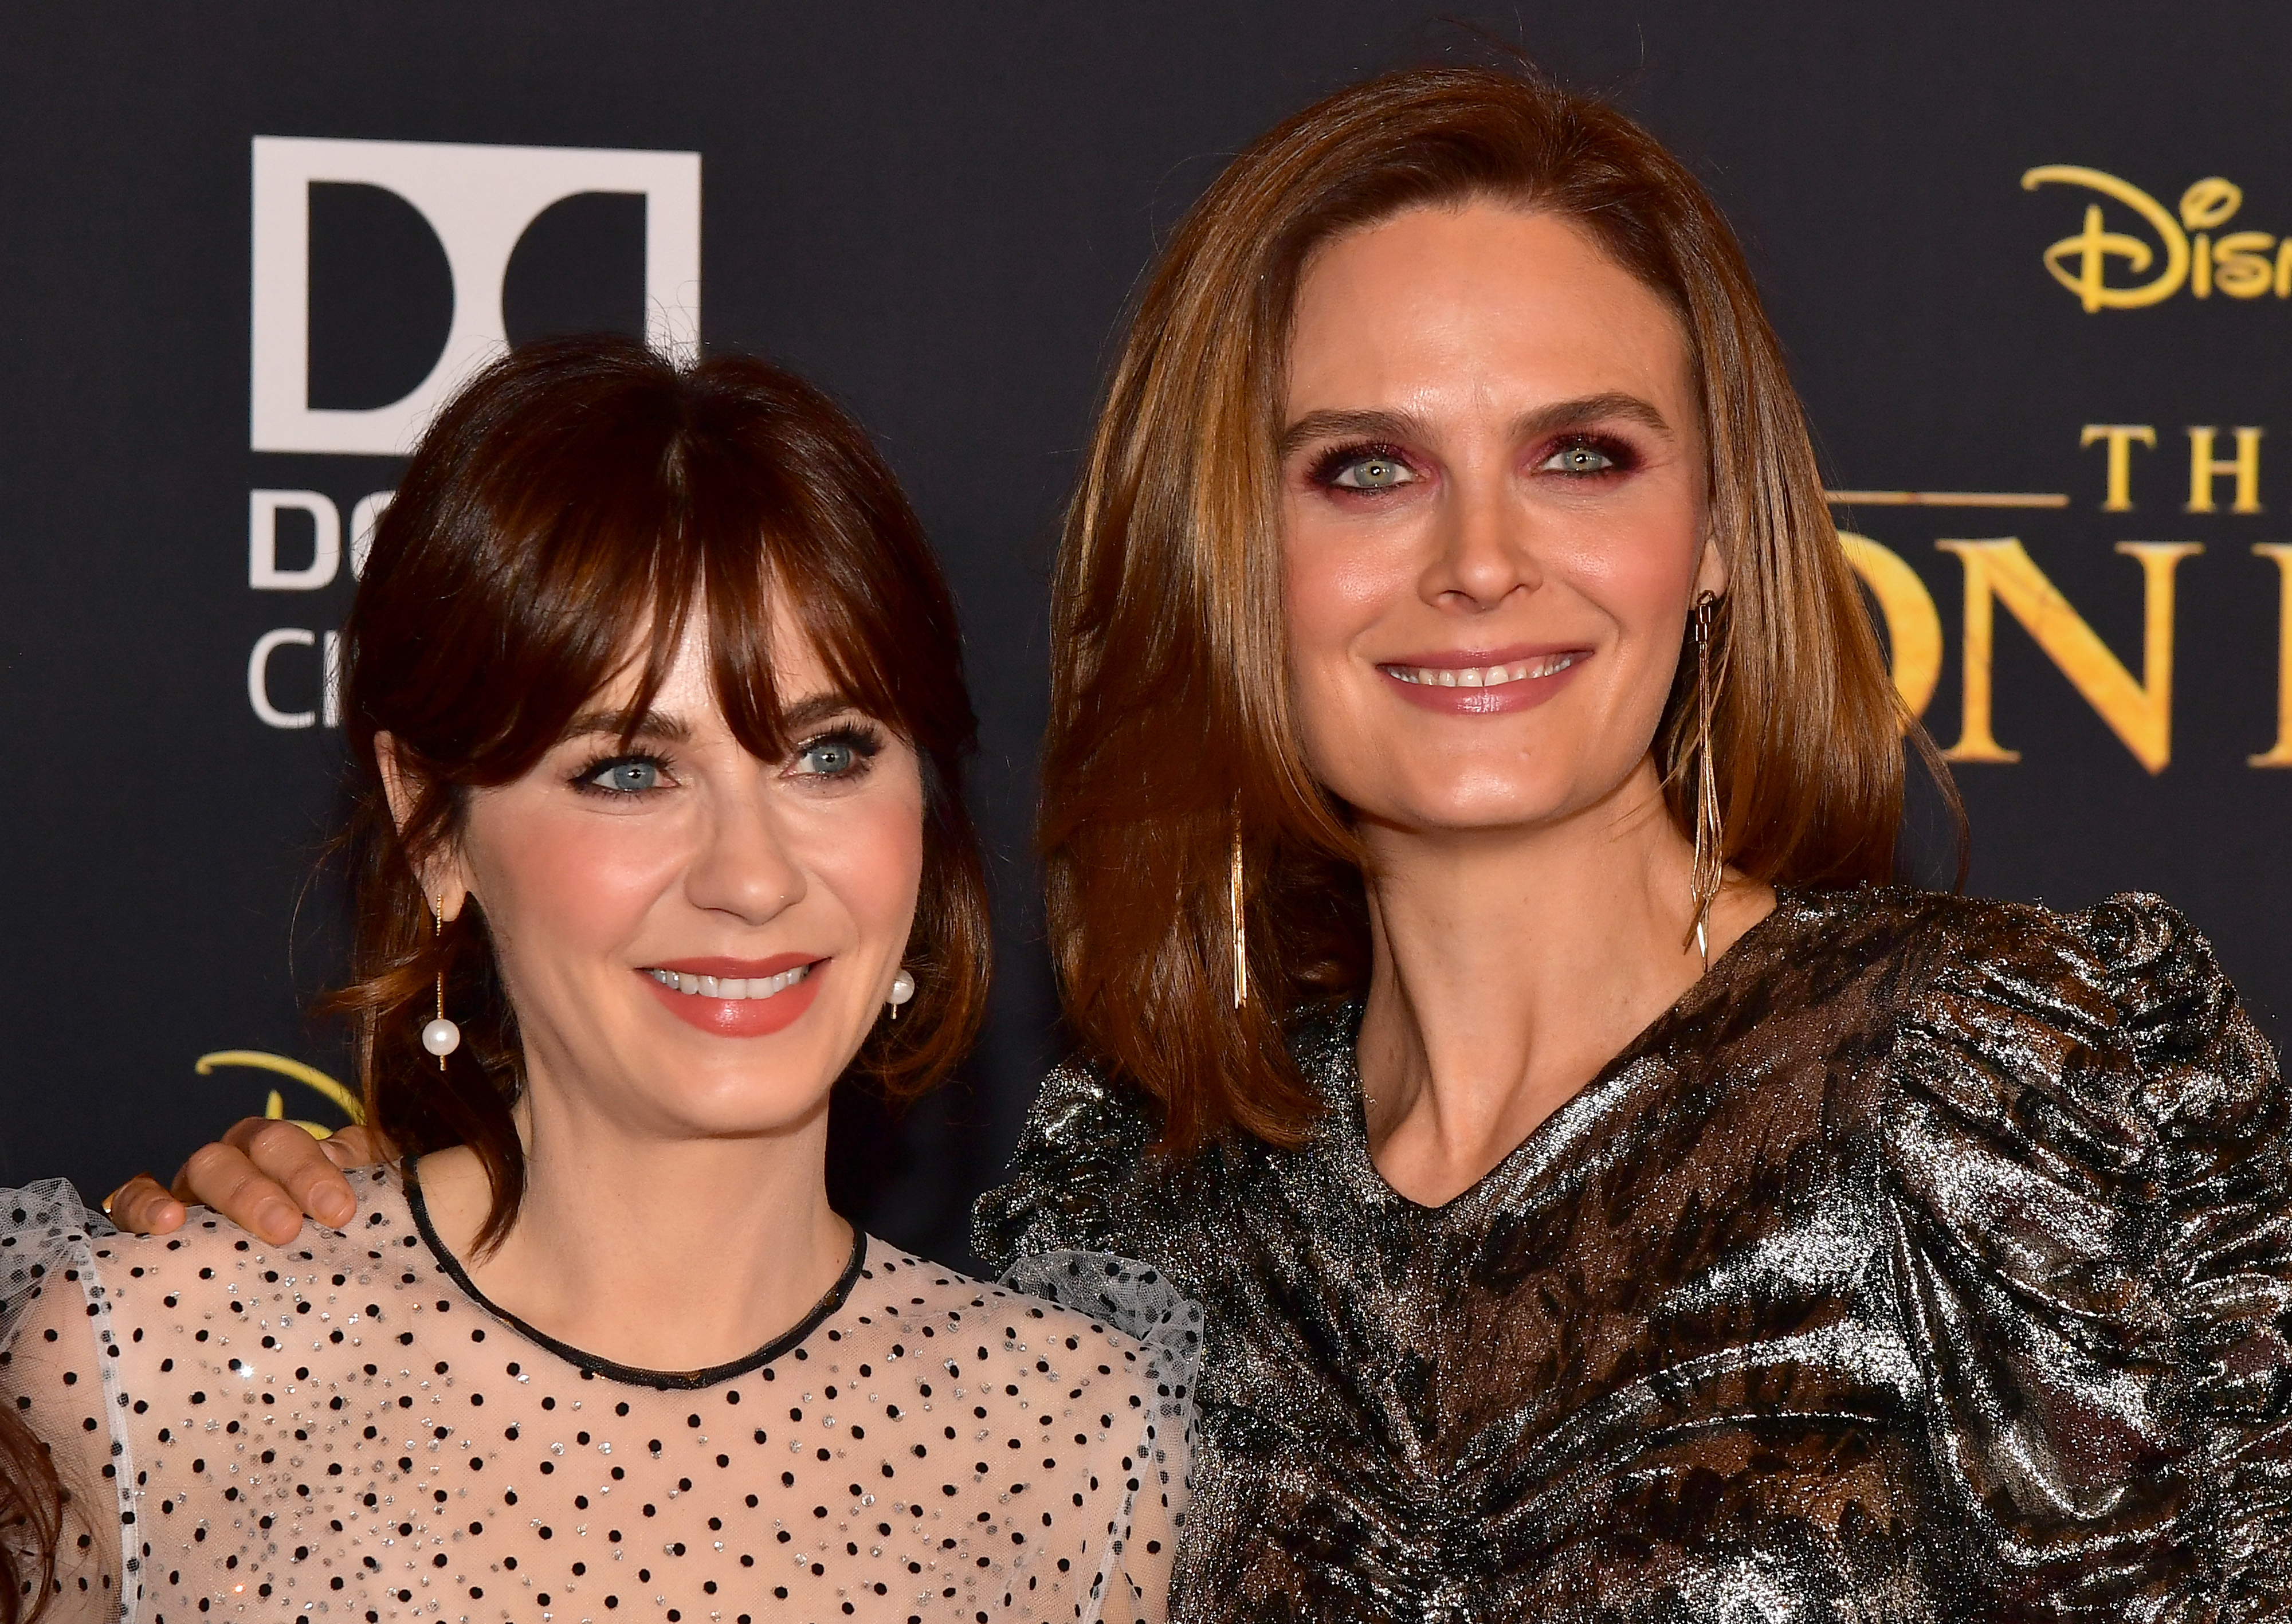 Zooey Deschanel and Emily Deschanel smiling for photographers at an event